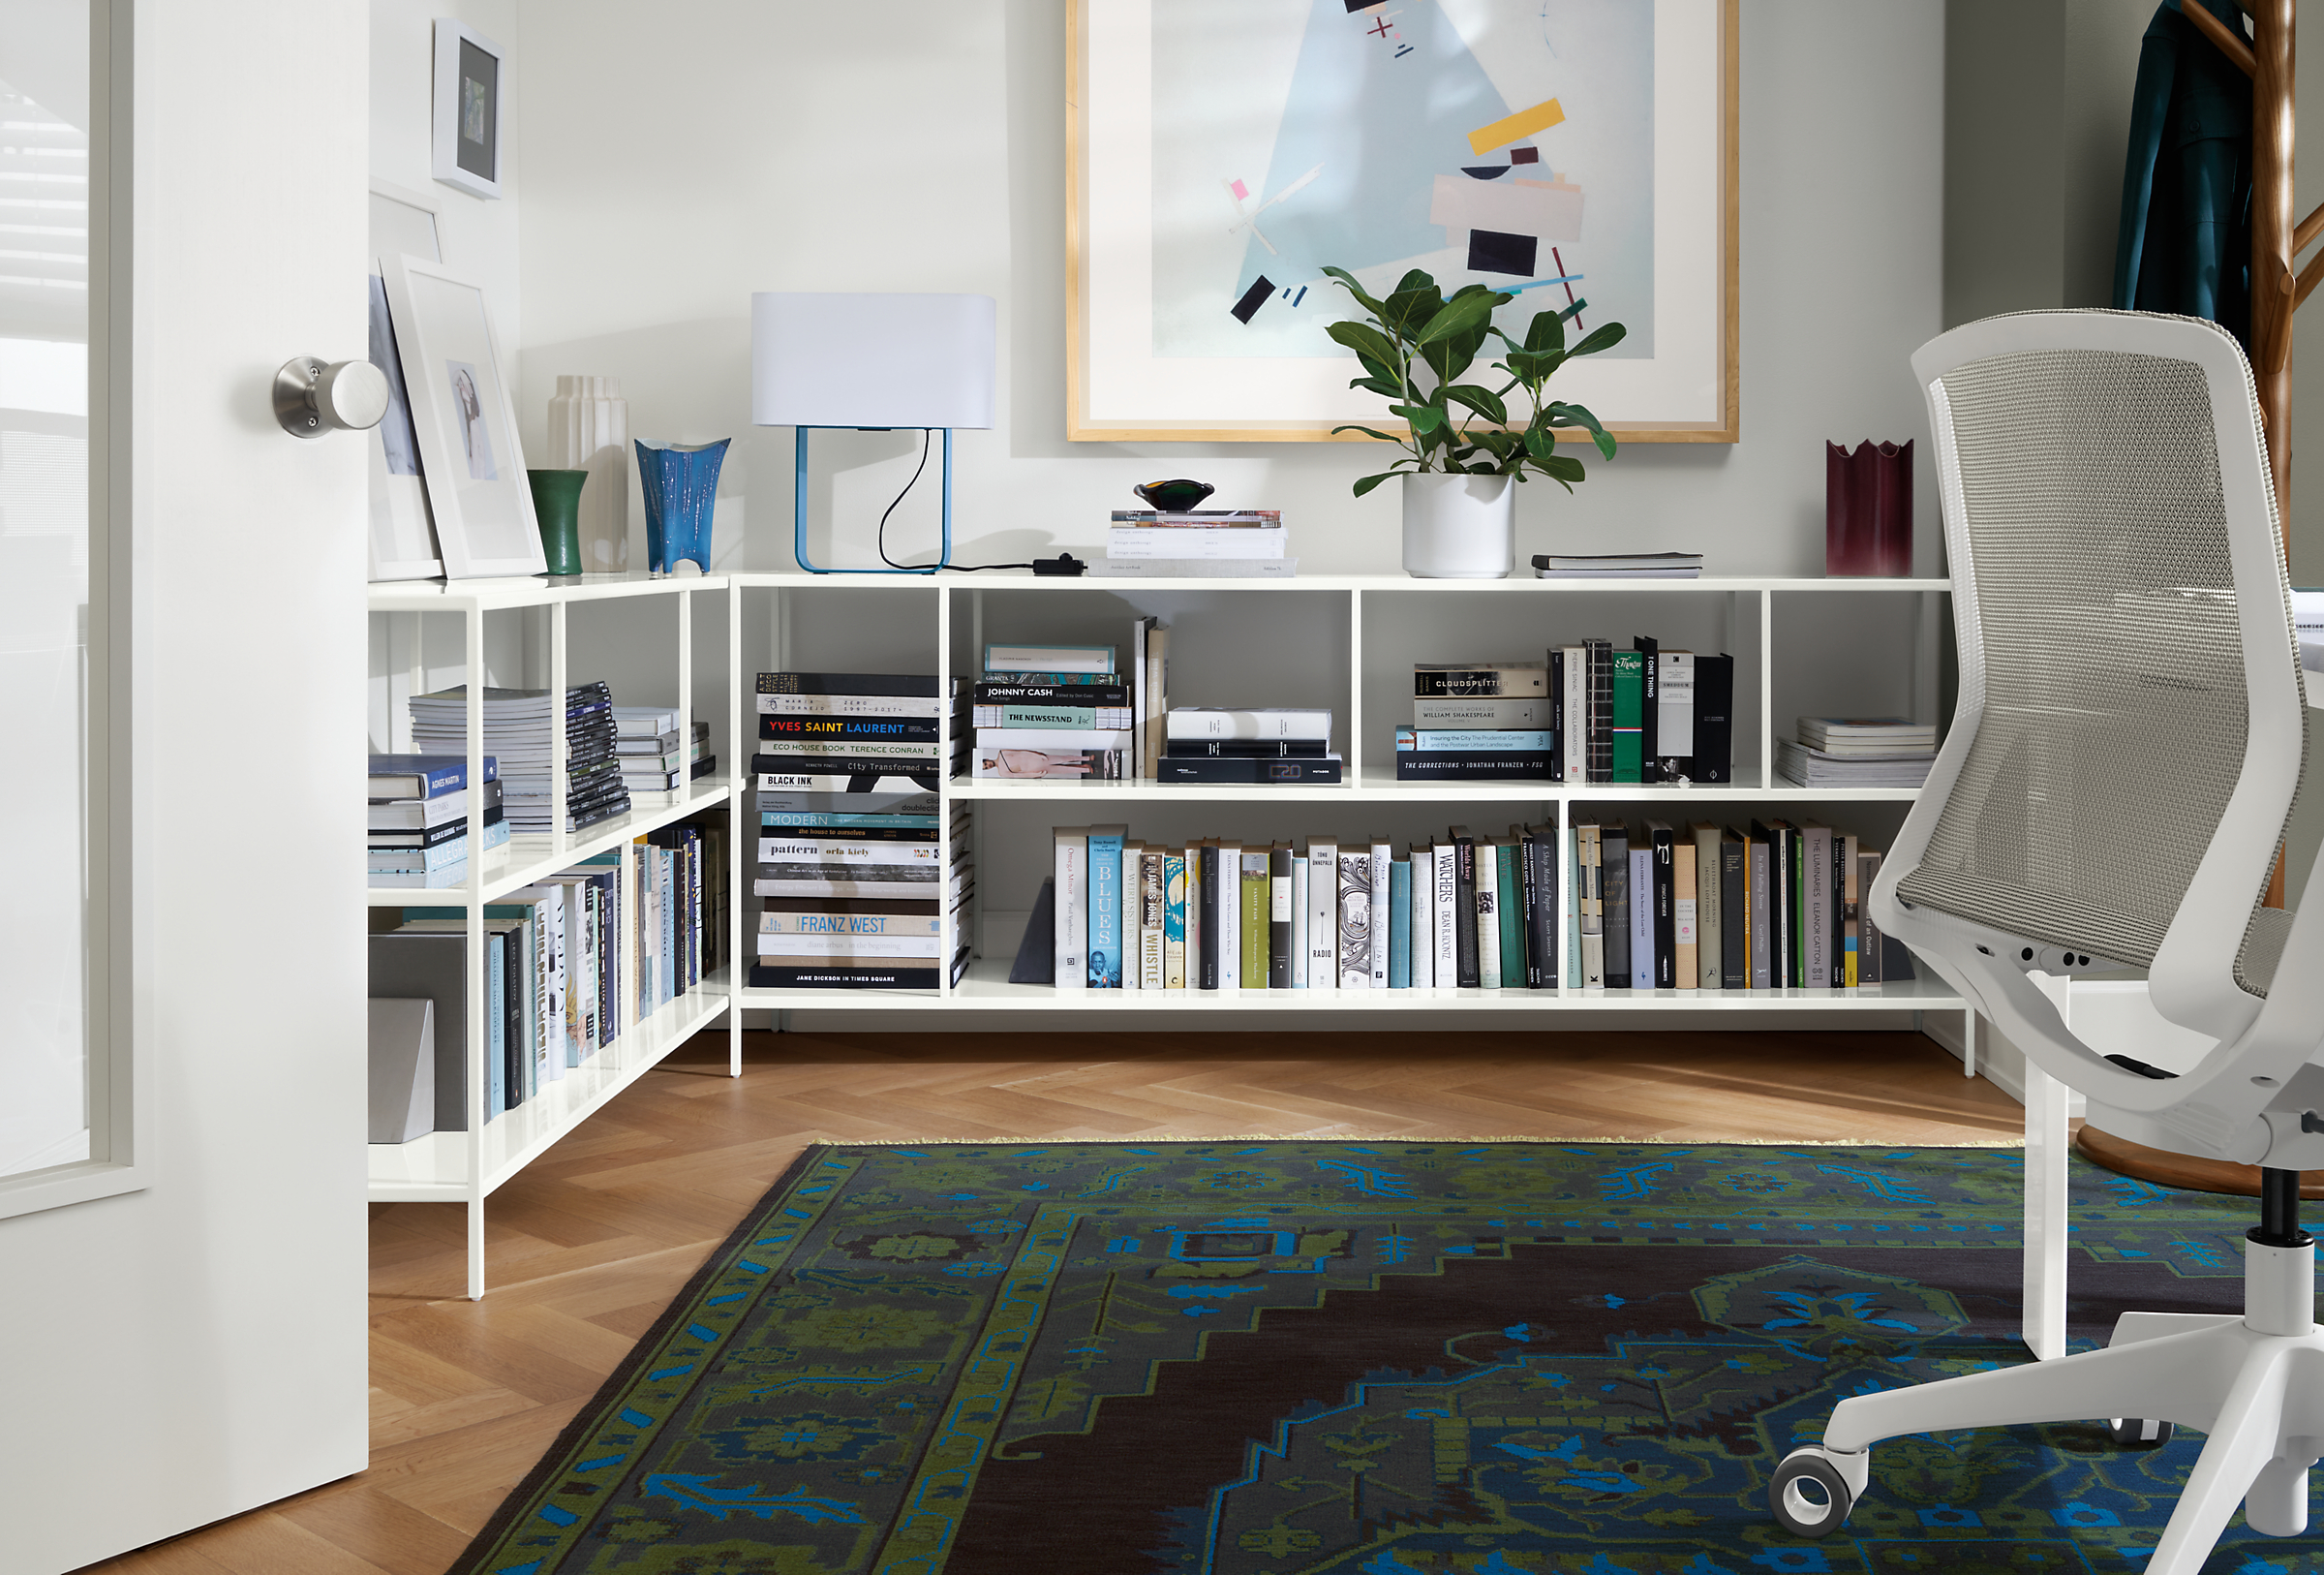 office with foshay console bookcases in white, cynara office chair, heriz rug.